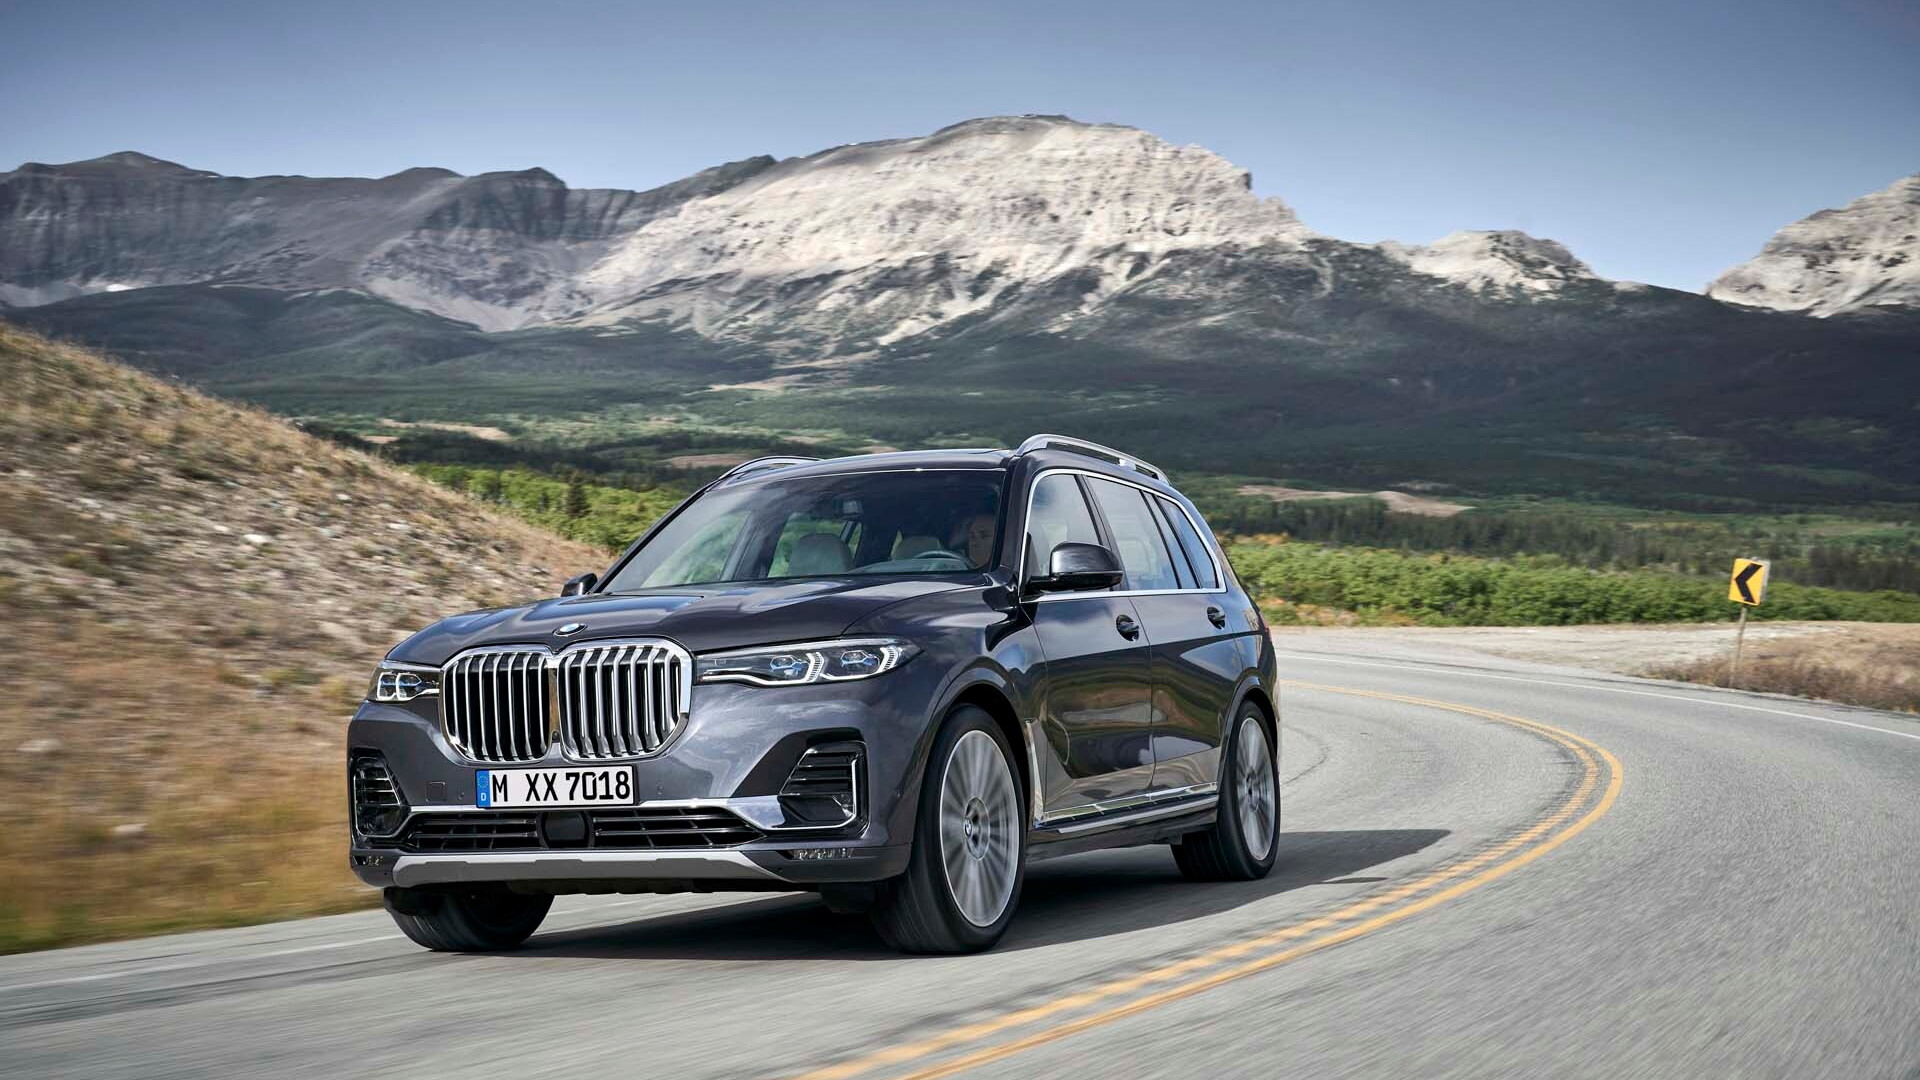 2019 Bmw X7 3 Row Suv Debuts The Bling Comes Standard